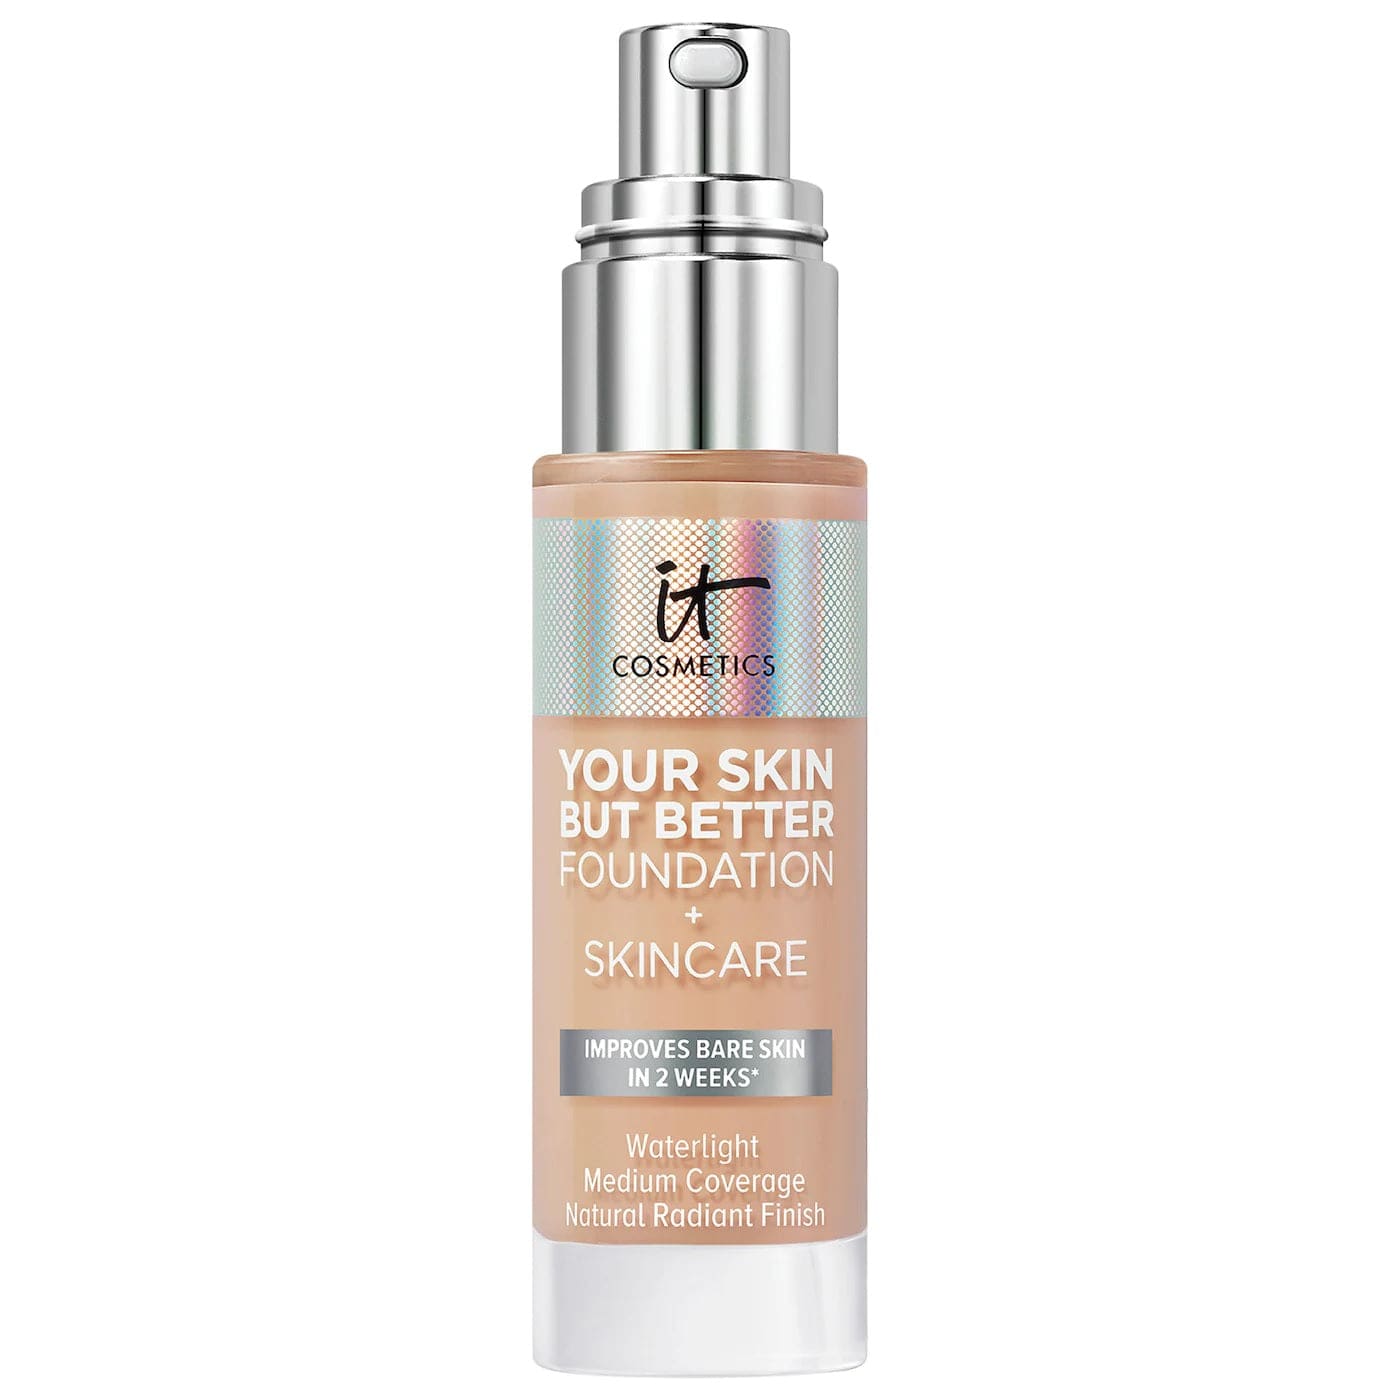 IT COSMETICS Beauty IT Cosmetics Your Skin But Better Foundation and Skincare 30ml - 30 Medium Cool